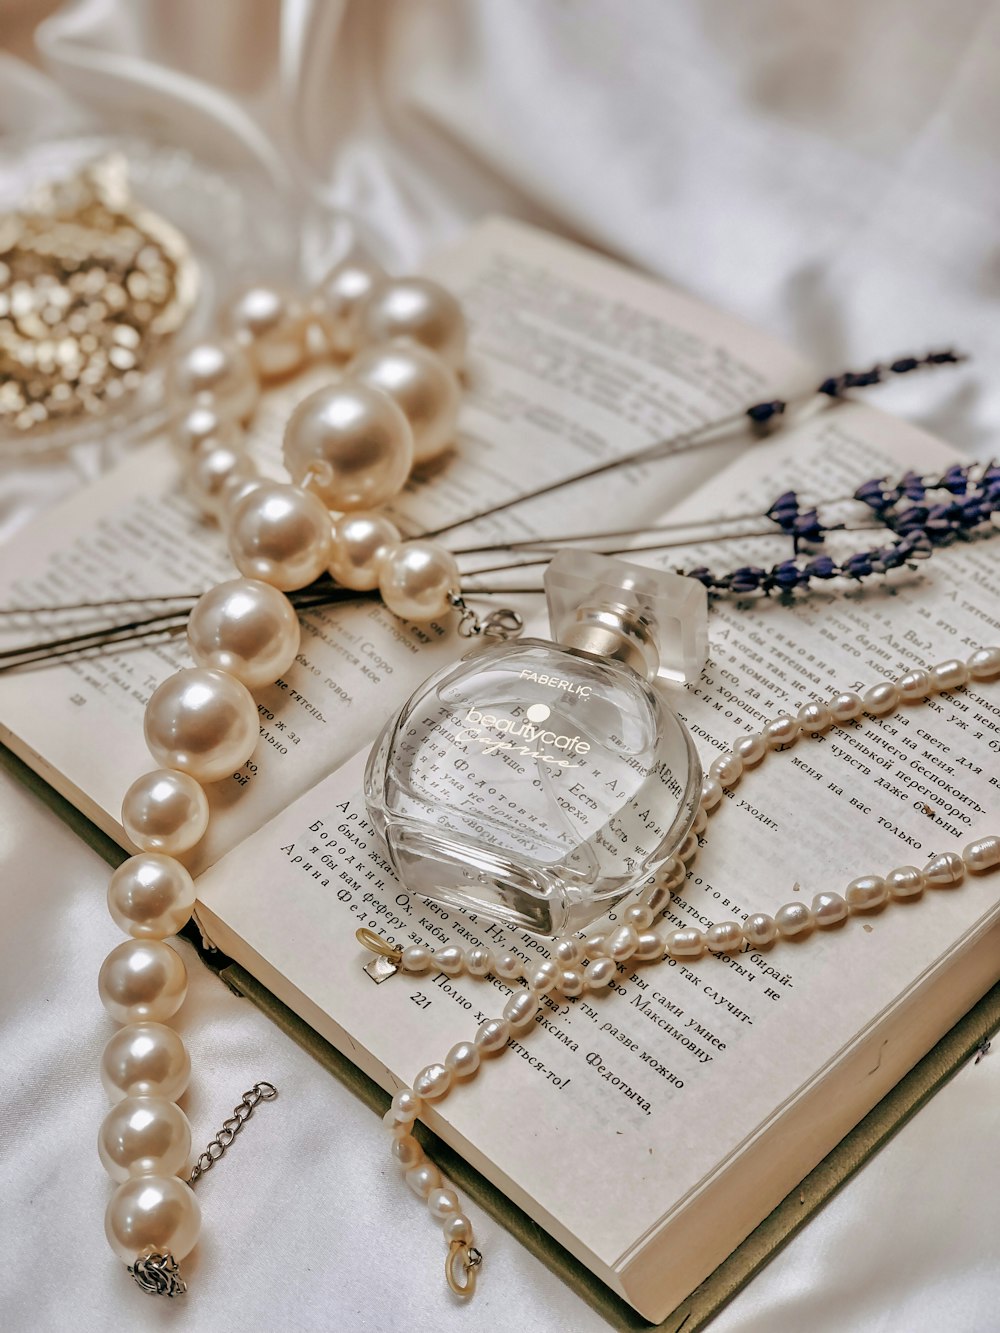 a book with pearls and a necklace on it